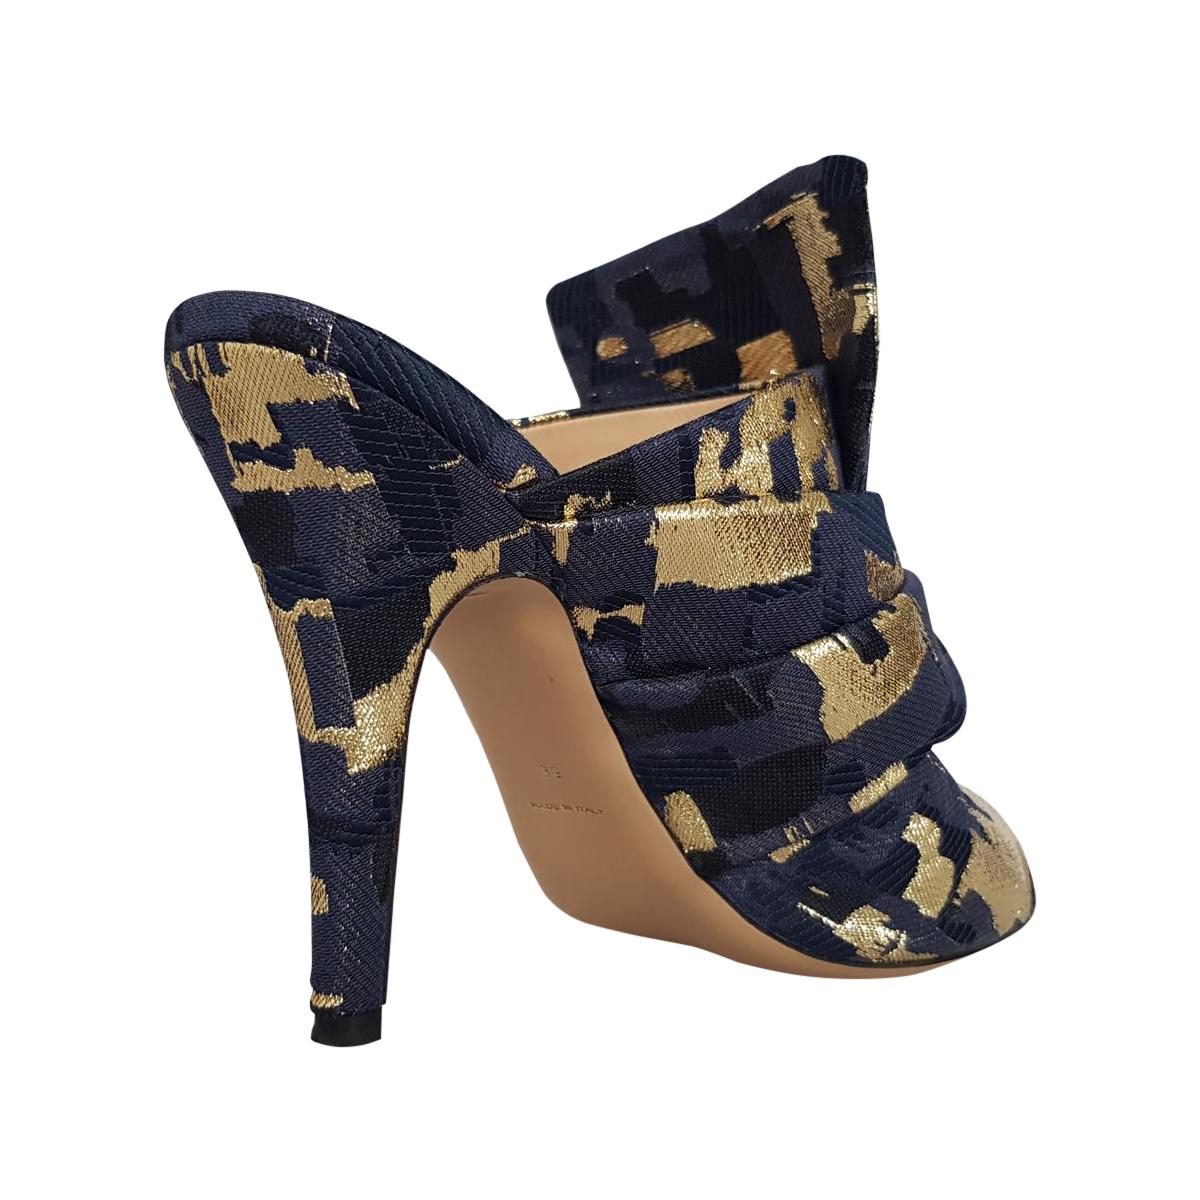 Super chic Gianluca Capannolo sabot shoes
Leather and textile
Gold / blue color
Lamé
Open toe
Heel cm 10 (3.9 inches)
Worldwide express shipping included in the price !